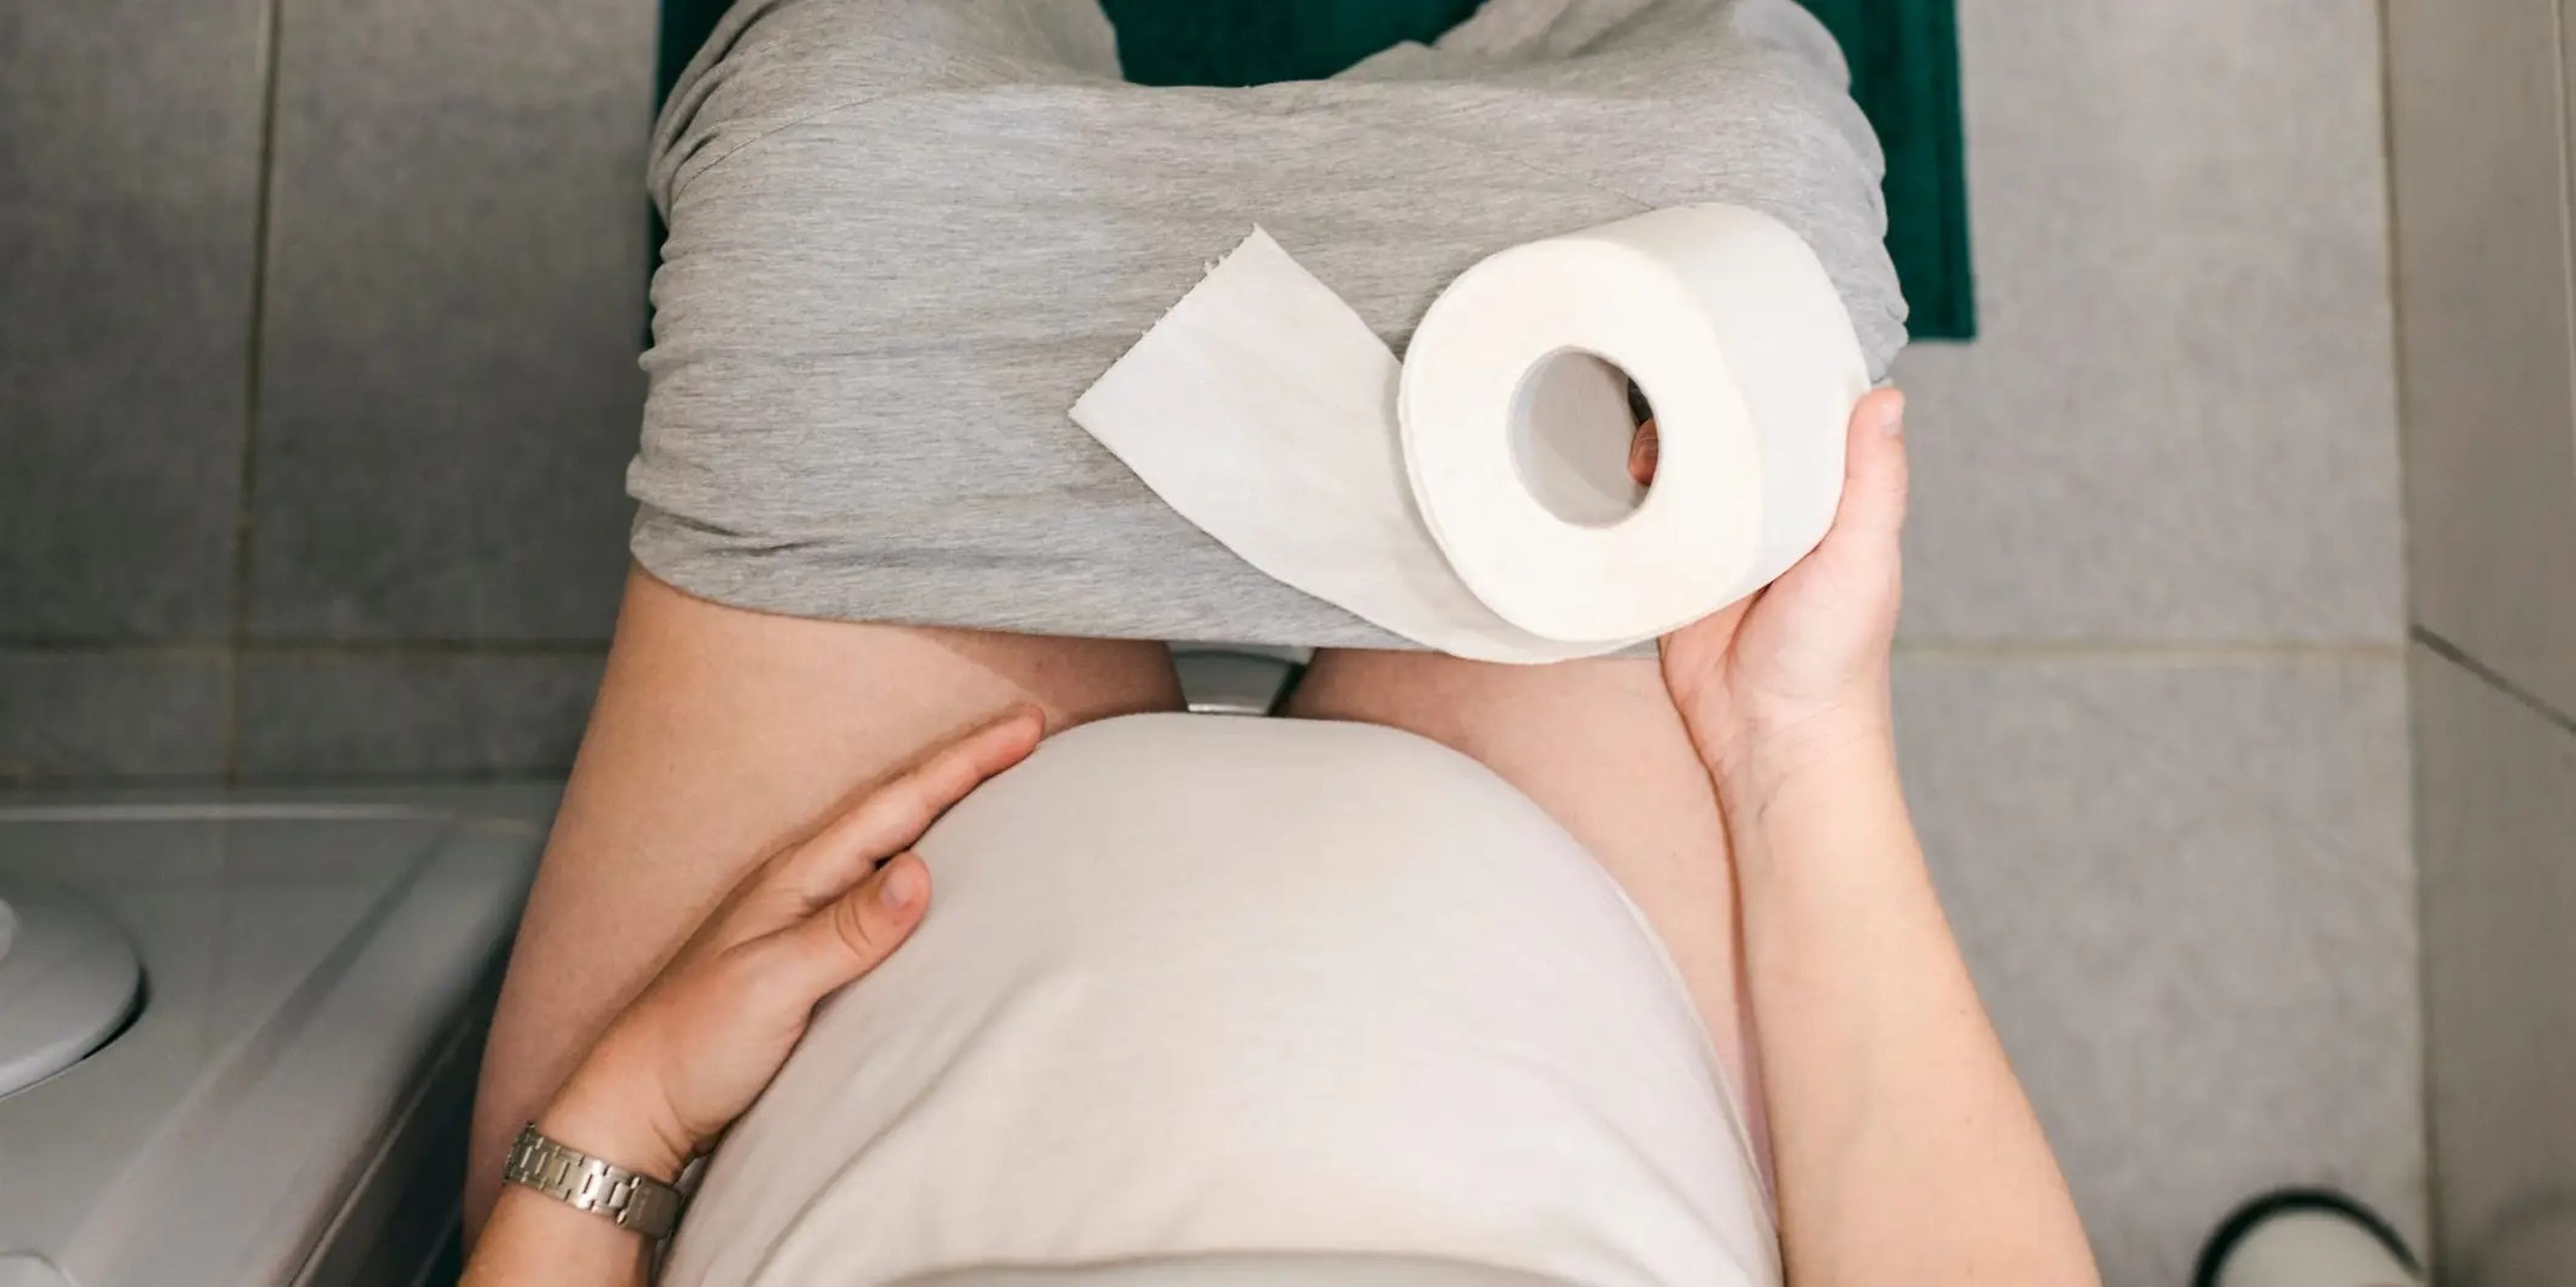 A pregnant woman sits on the toilet, constipated.